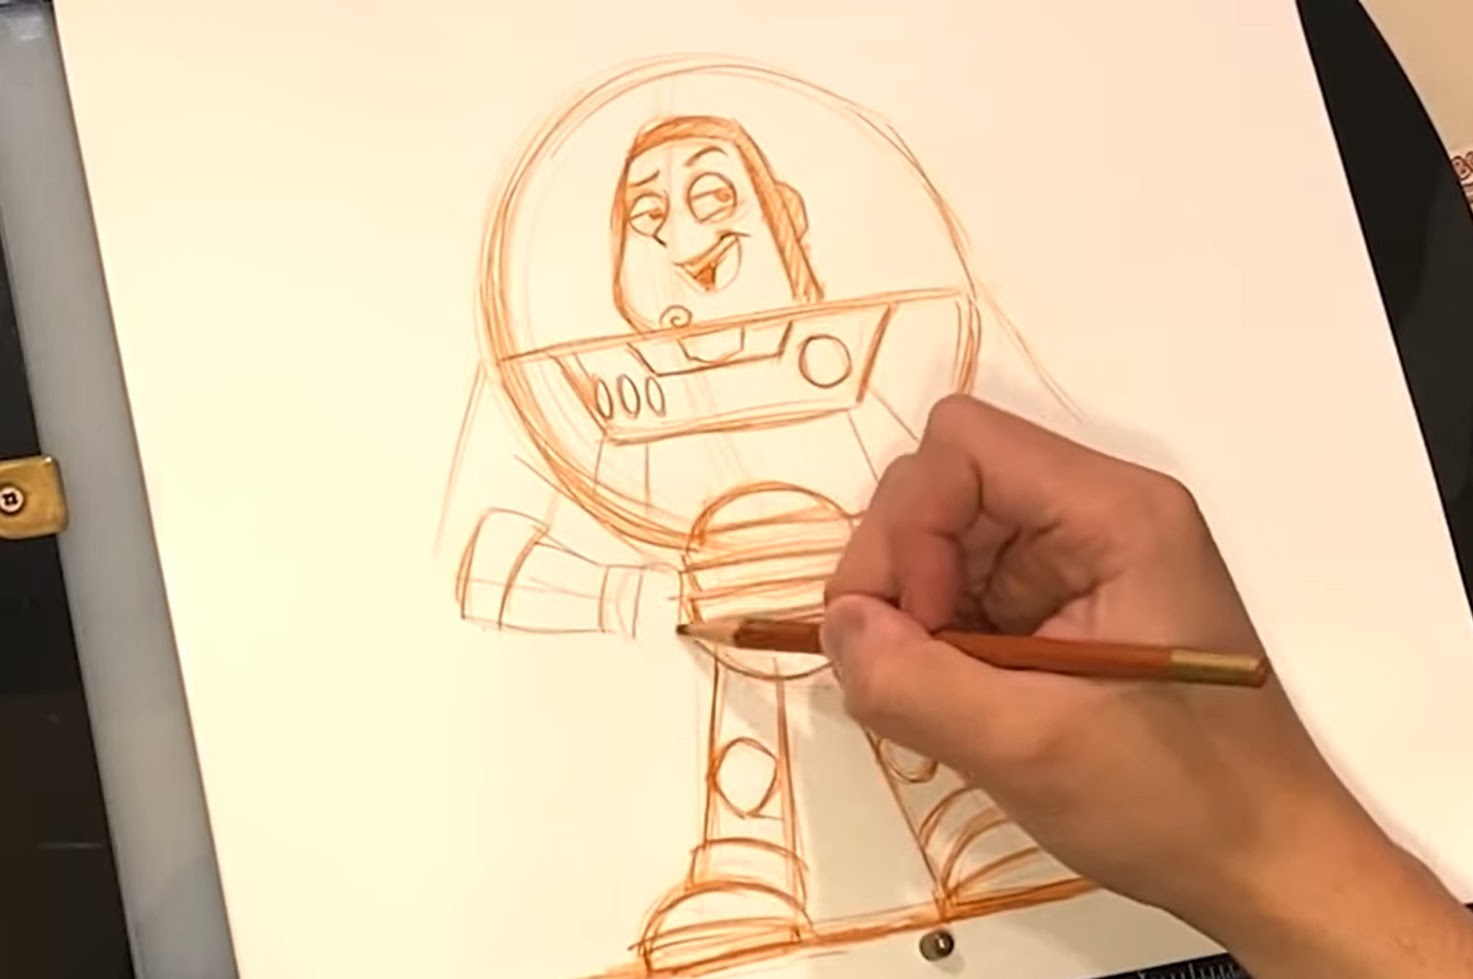 To infinite and beyond   I draw buzz lightyear do you have some tips  to improve thank you D  rdrawing